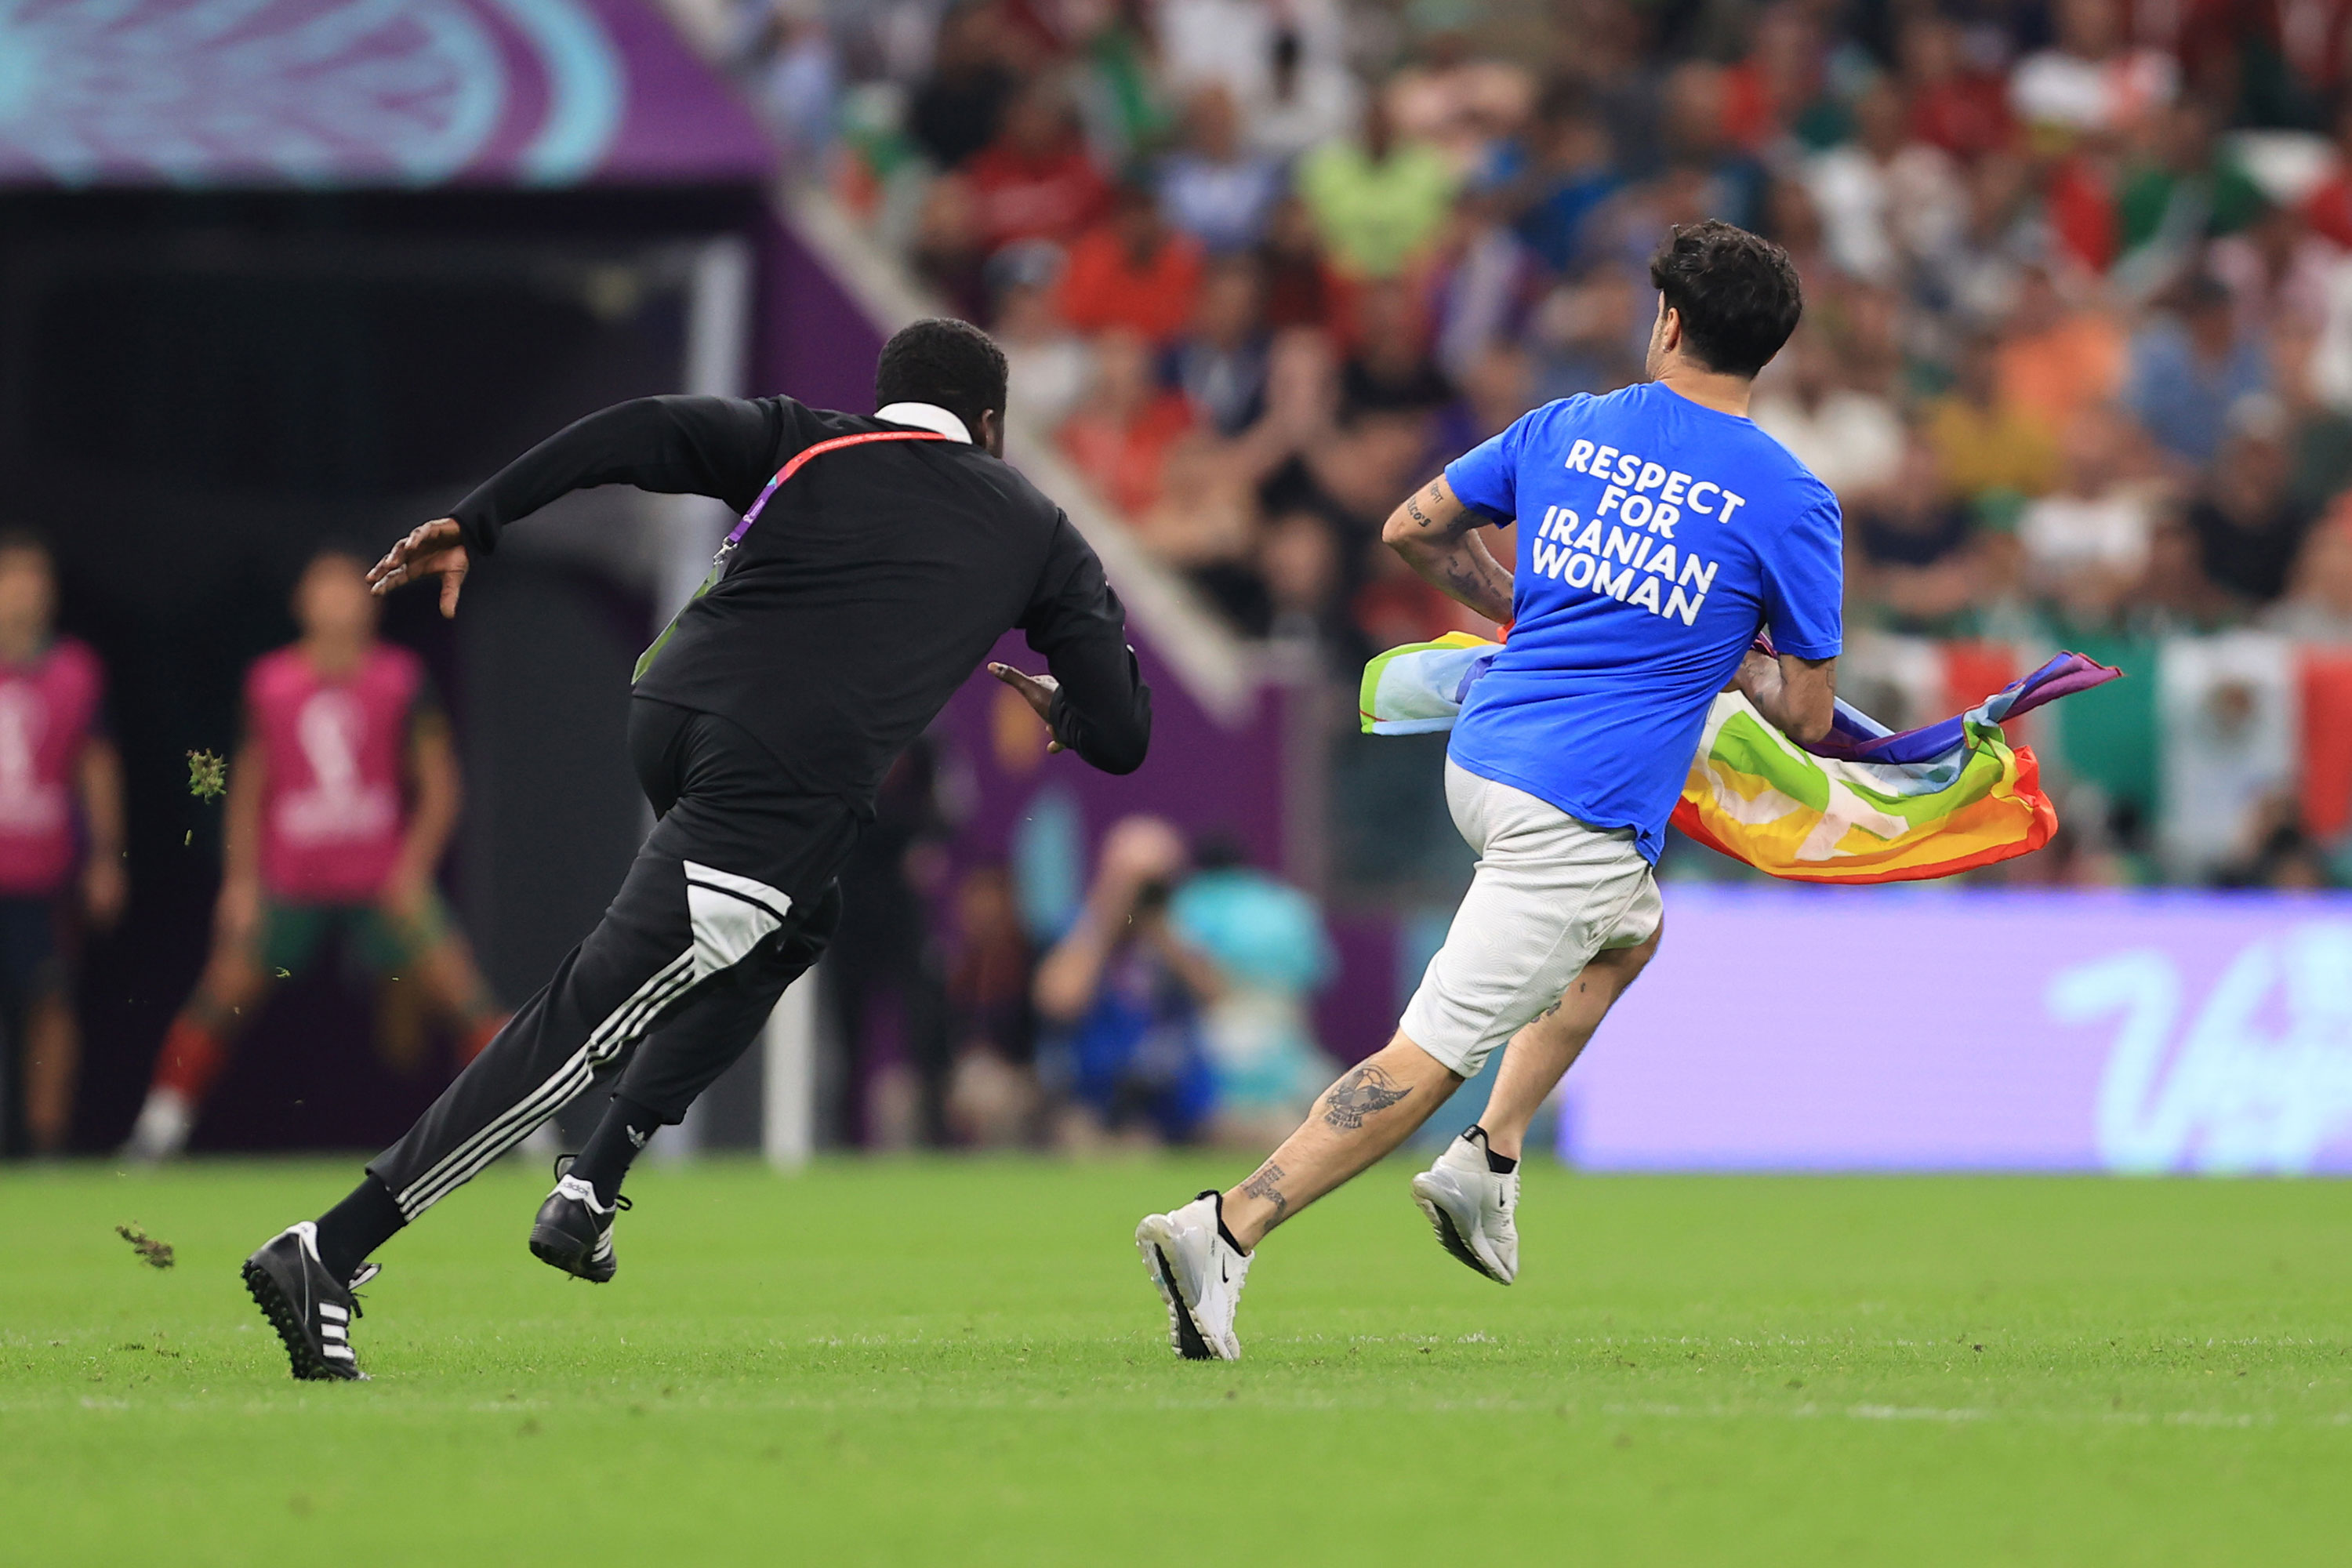 A pitch invader runs on the field during the match between Portugal and Uruguay on Monday.